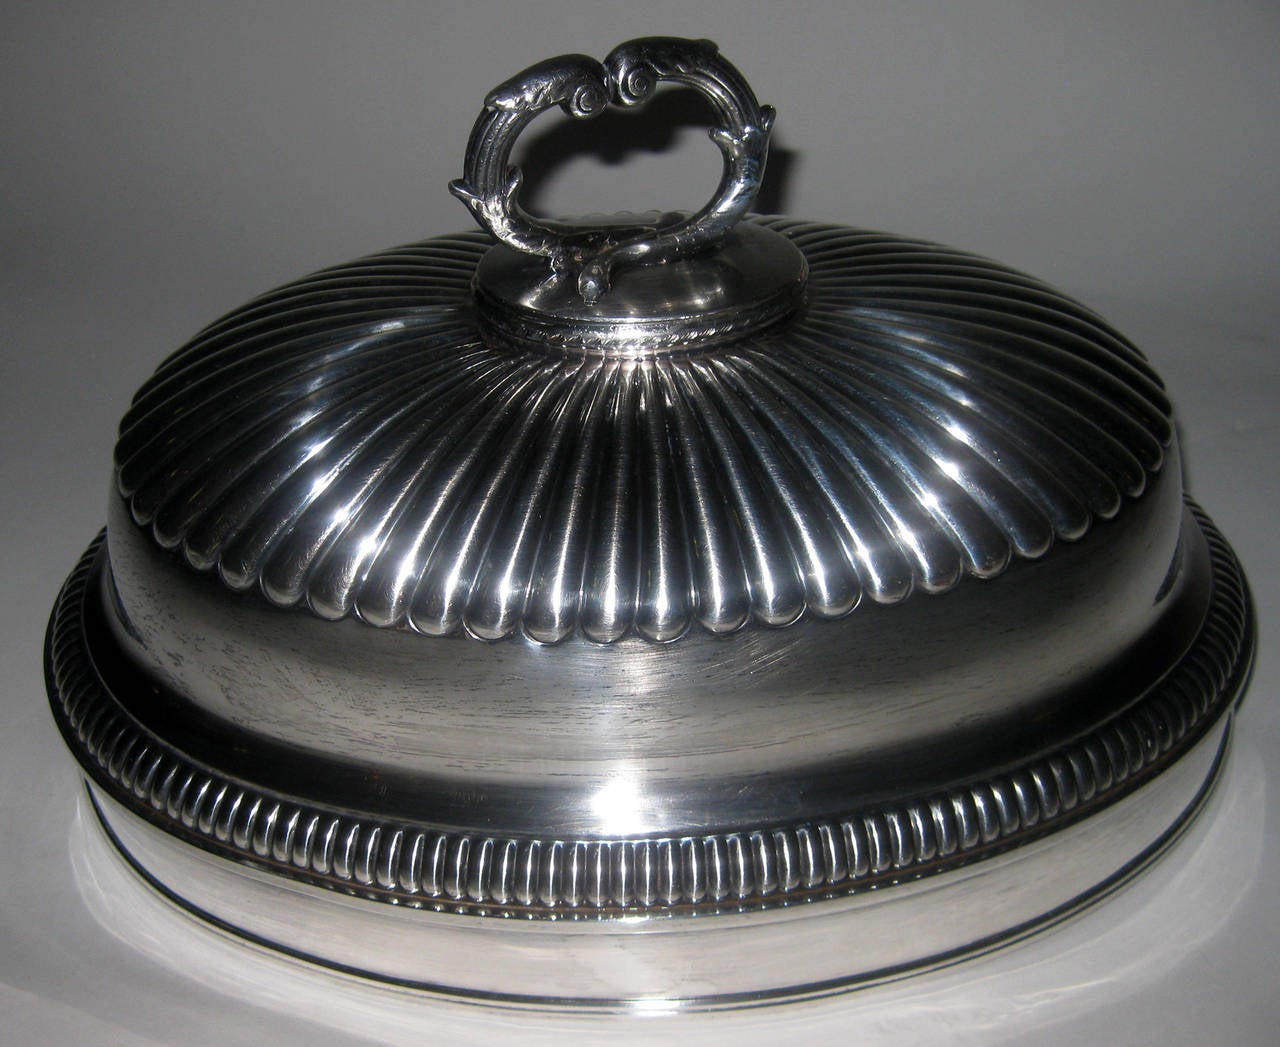 Large size English silver plate meat or food dome featuring extensive ribbing, a graceful twig motif handle and a crown engraved armorial. The initials RHC are distinct but the Latin phrase is very faint. The number 55 is marked underneath. See